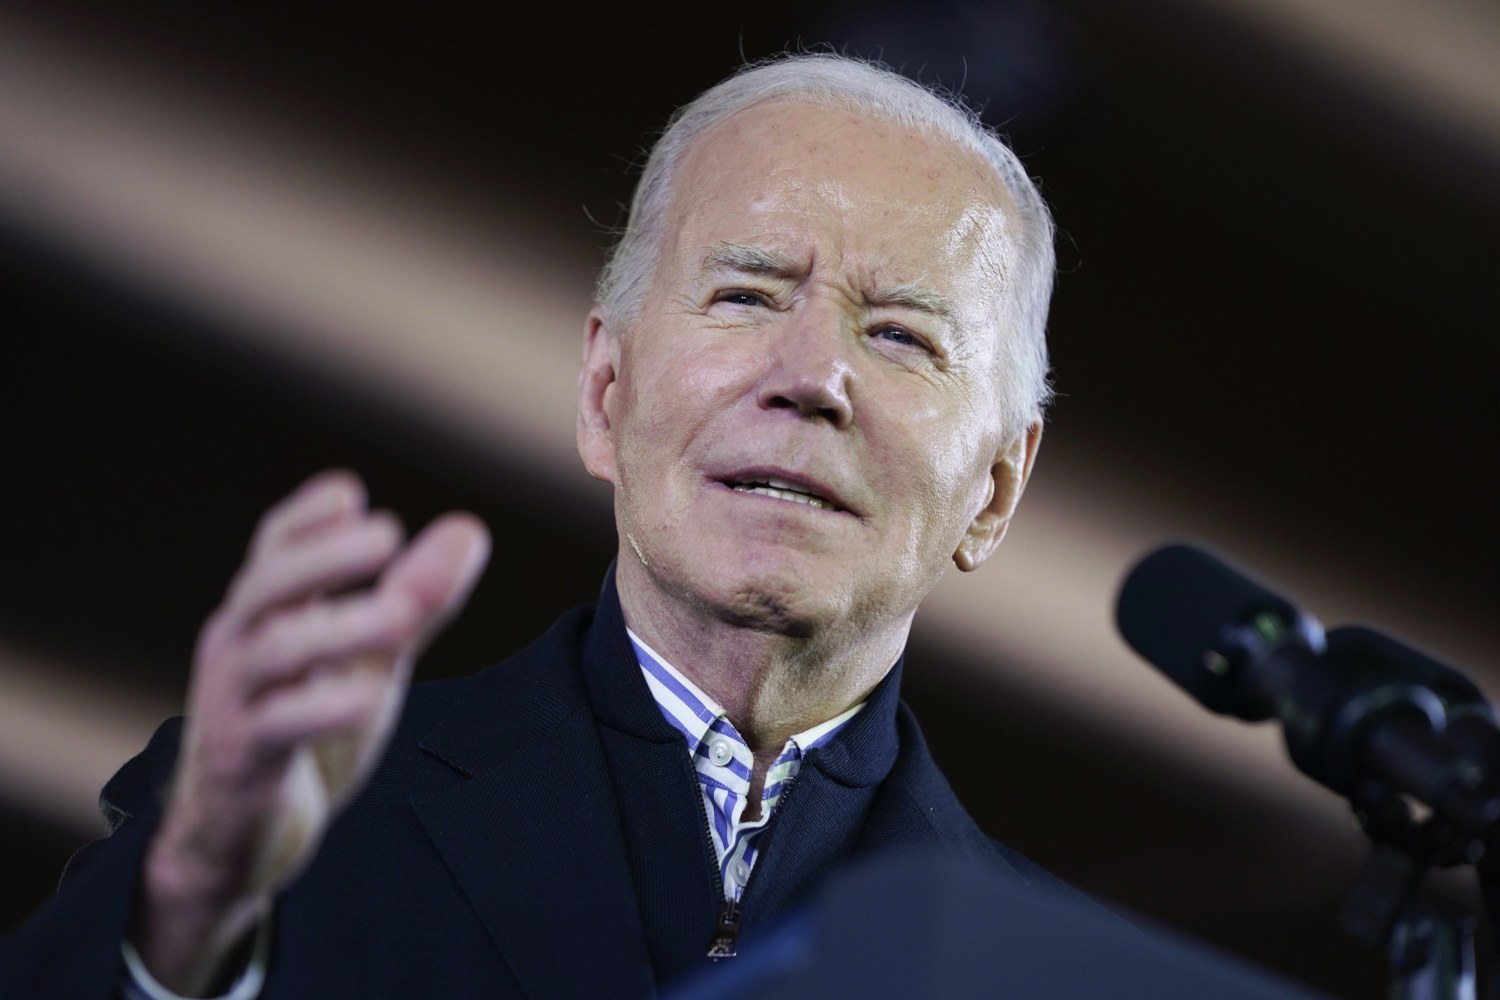 Analysis: Biden’s 2024 presidential chances are much stronger than people realize. Here’s why. (msnbc.com)